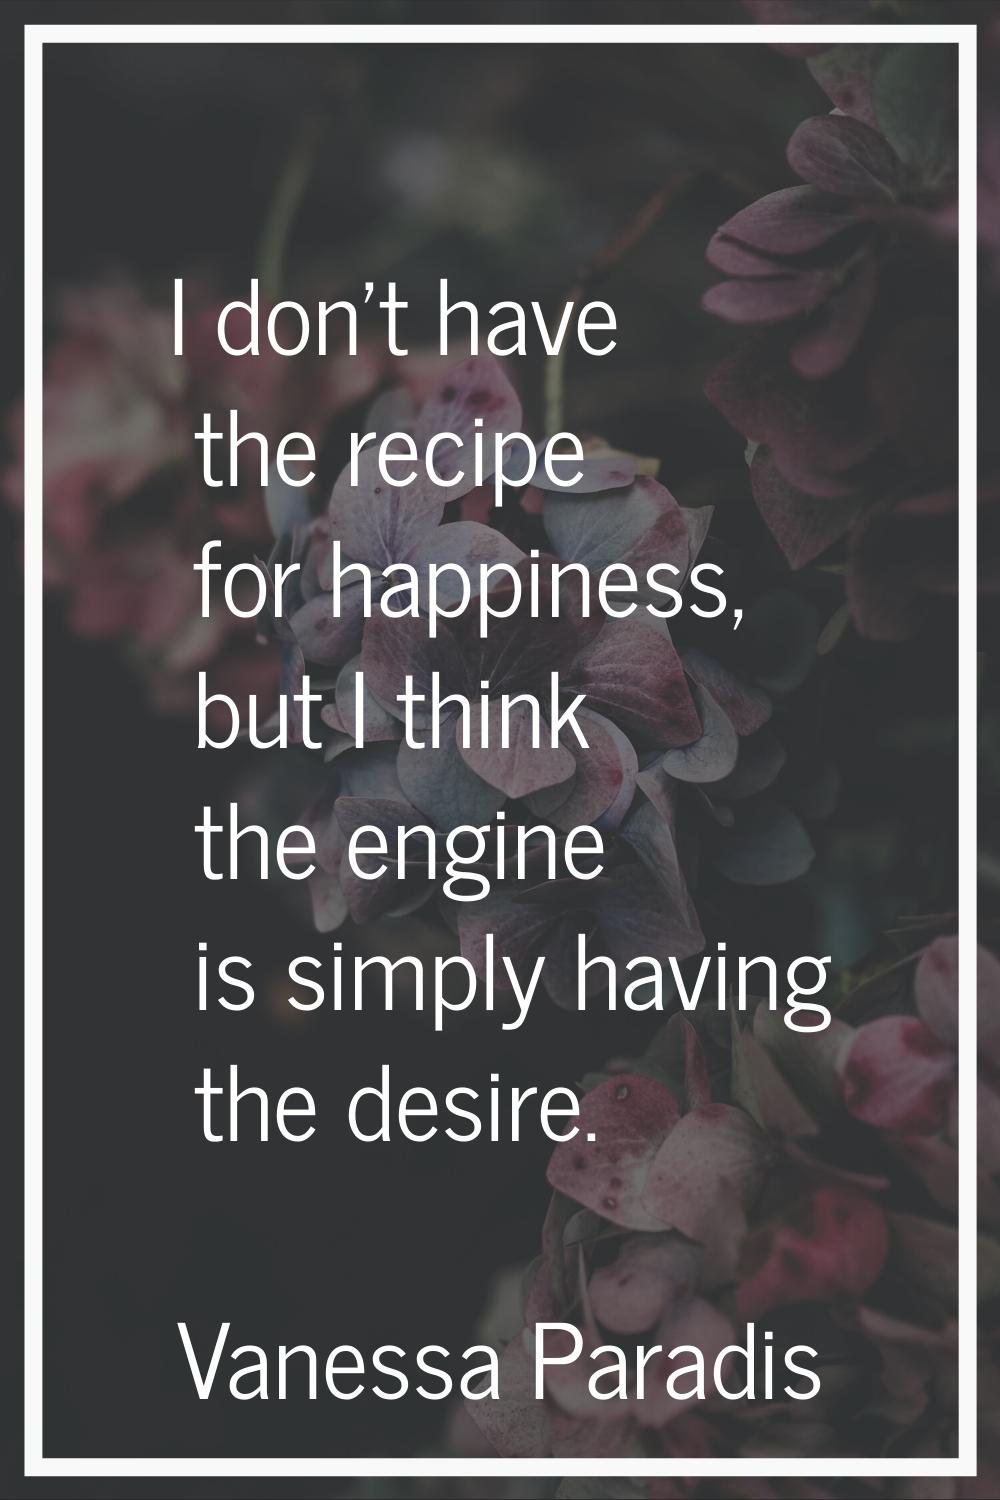 I don't have the recipe for happiness, but I think the engine is simply having the desire.